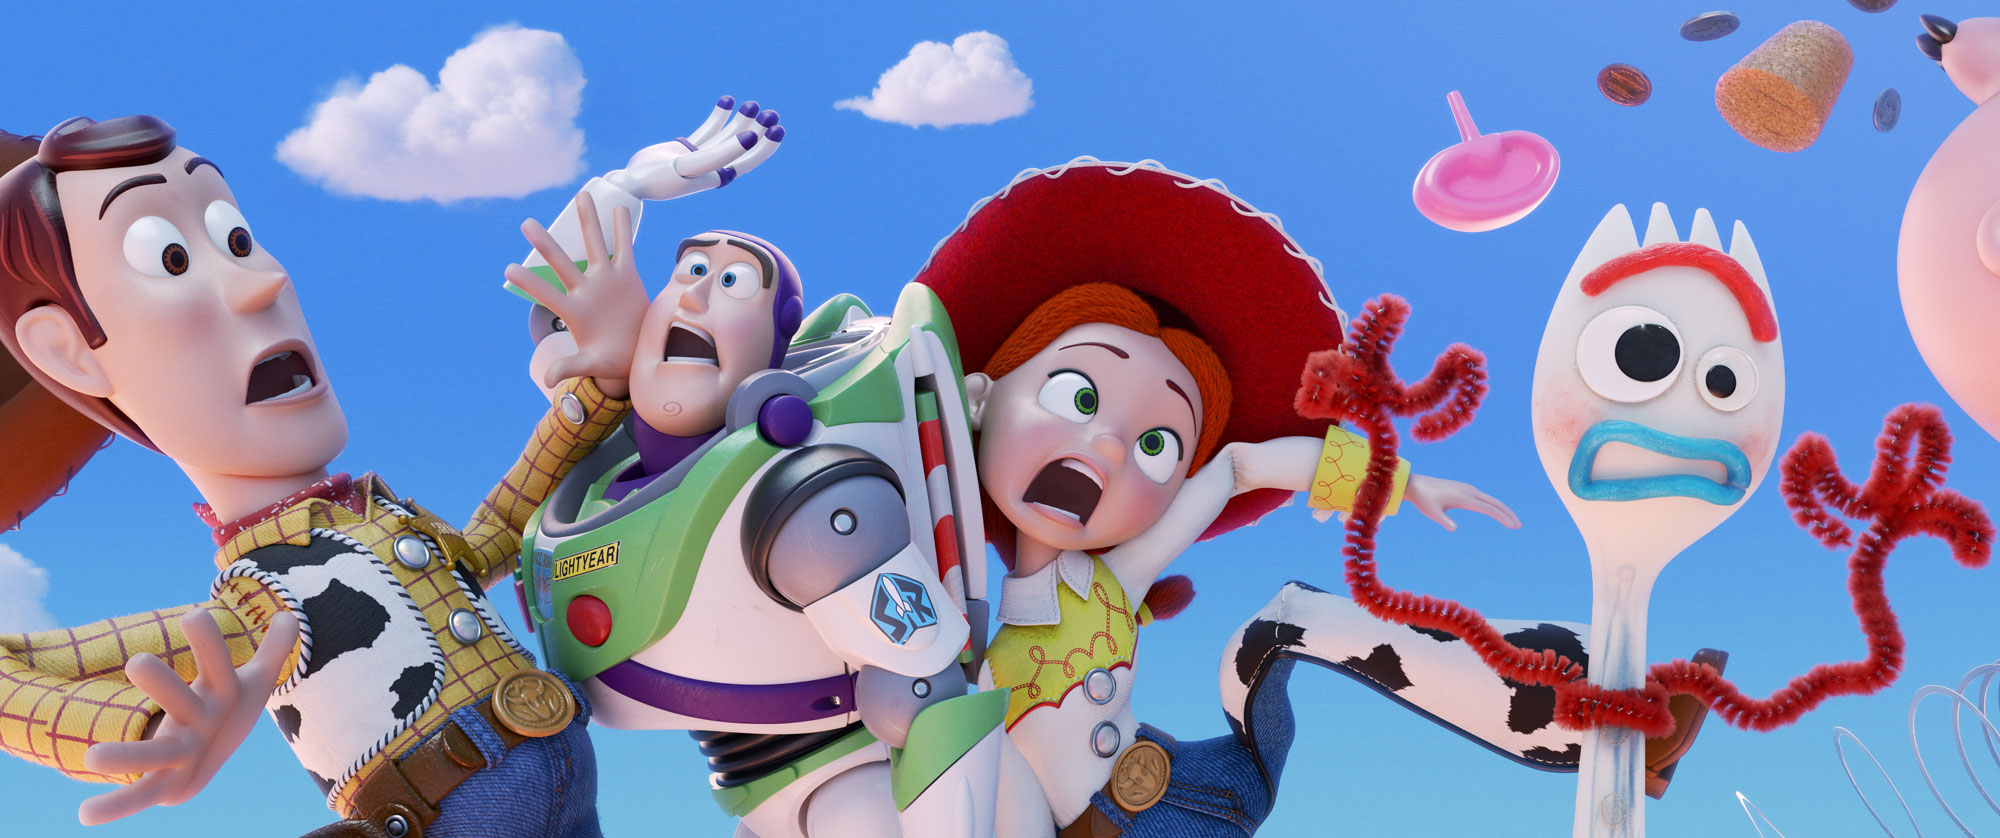 Disney-Pixar Releases First Teaser and Poster for Toy Story 4!